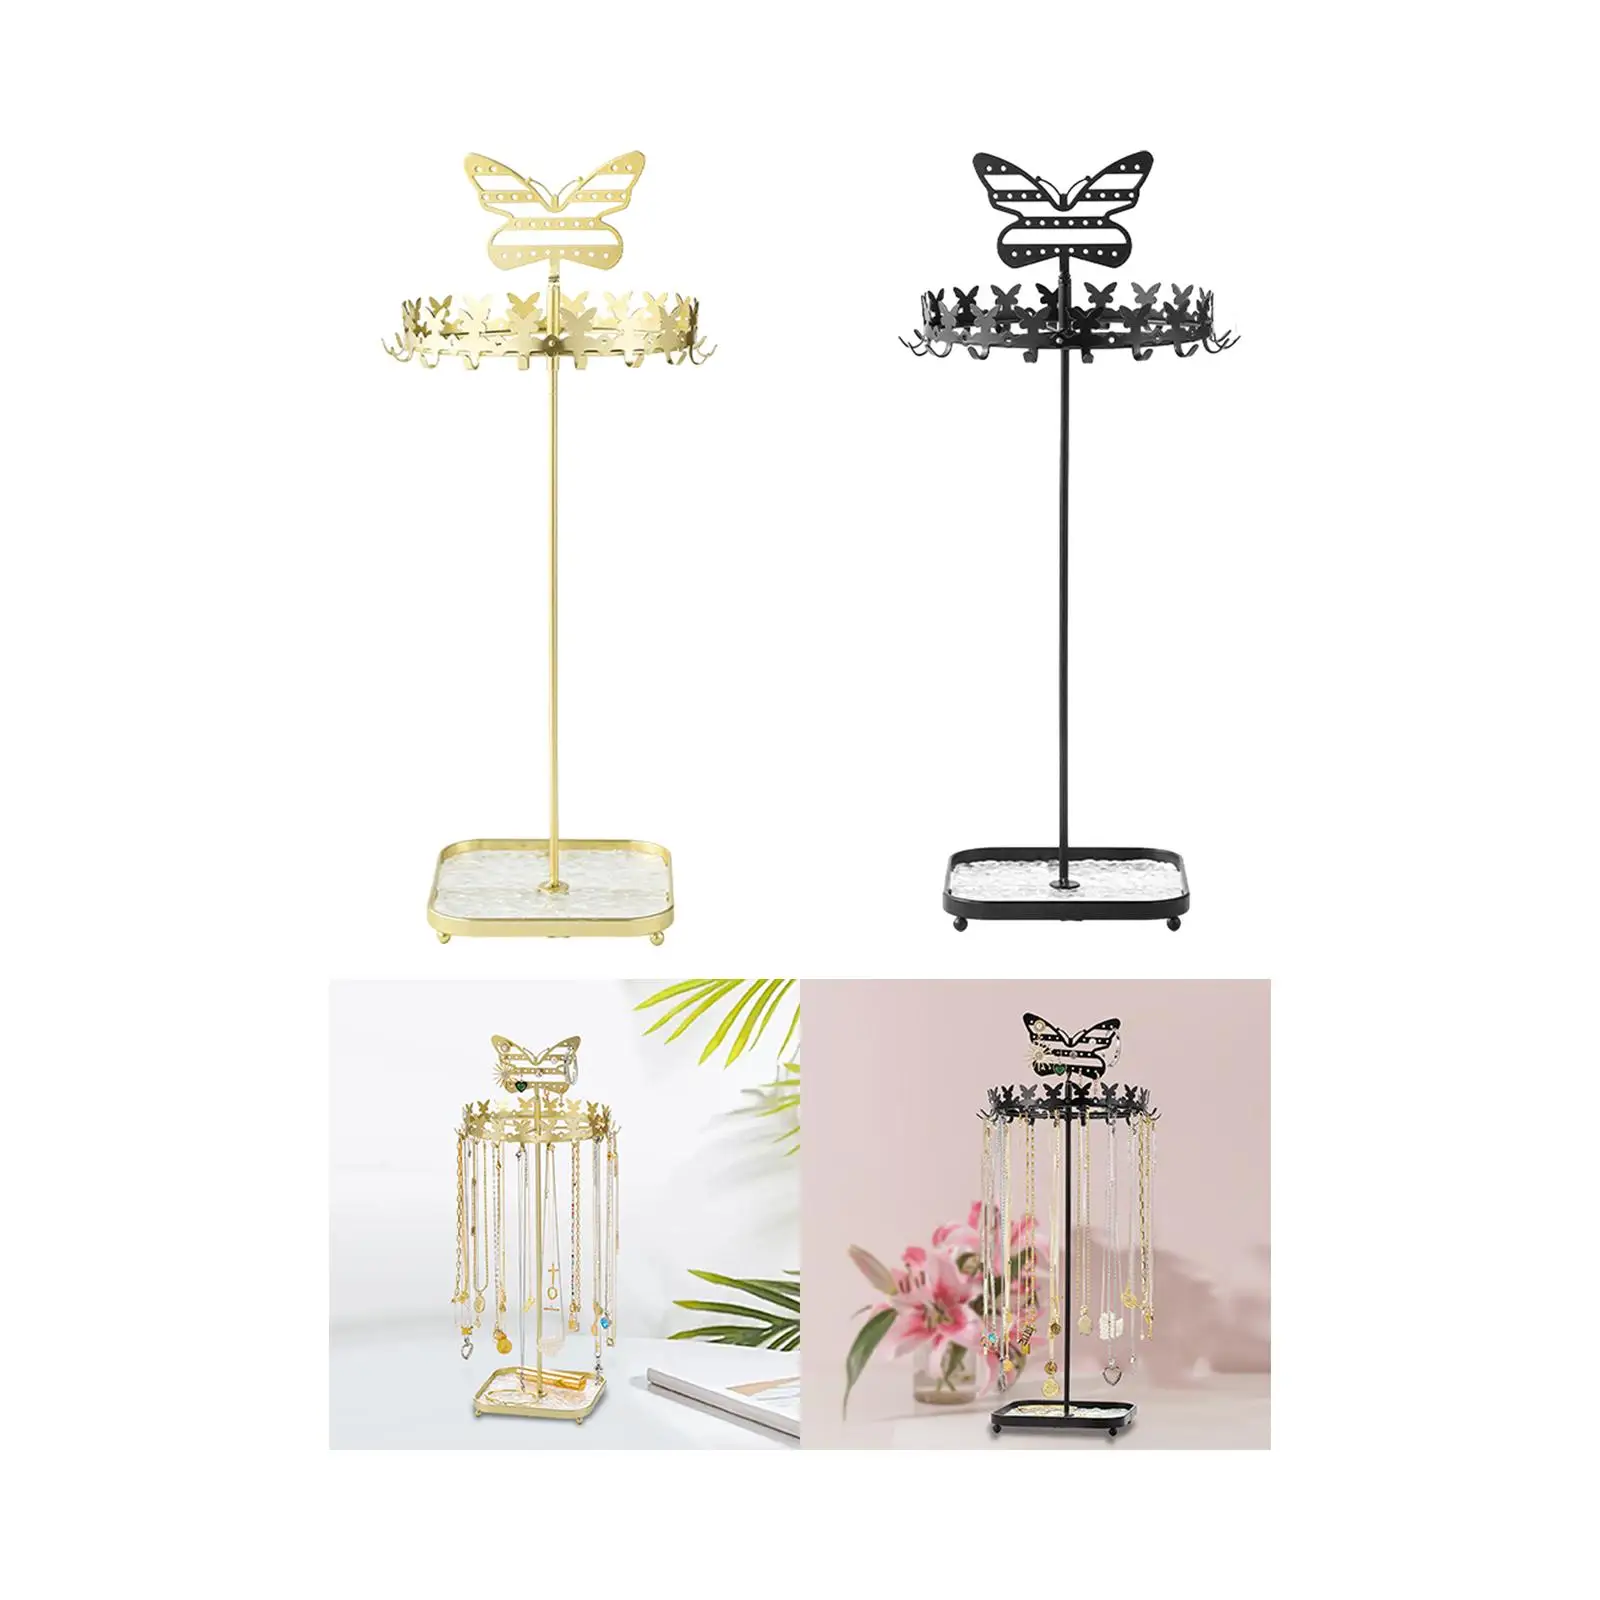 Jewelry Organizer Display Decorative Multifunction Jewelry Holder Necklaces Holder for Rings Bracelets Earrings Necklaces Shops